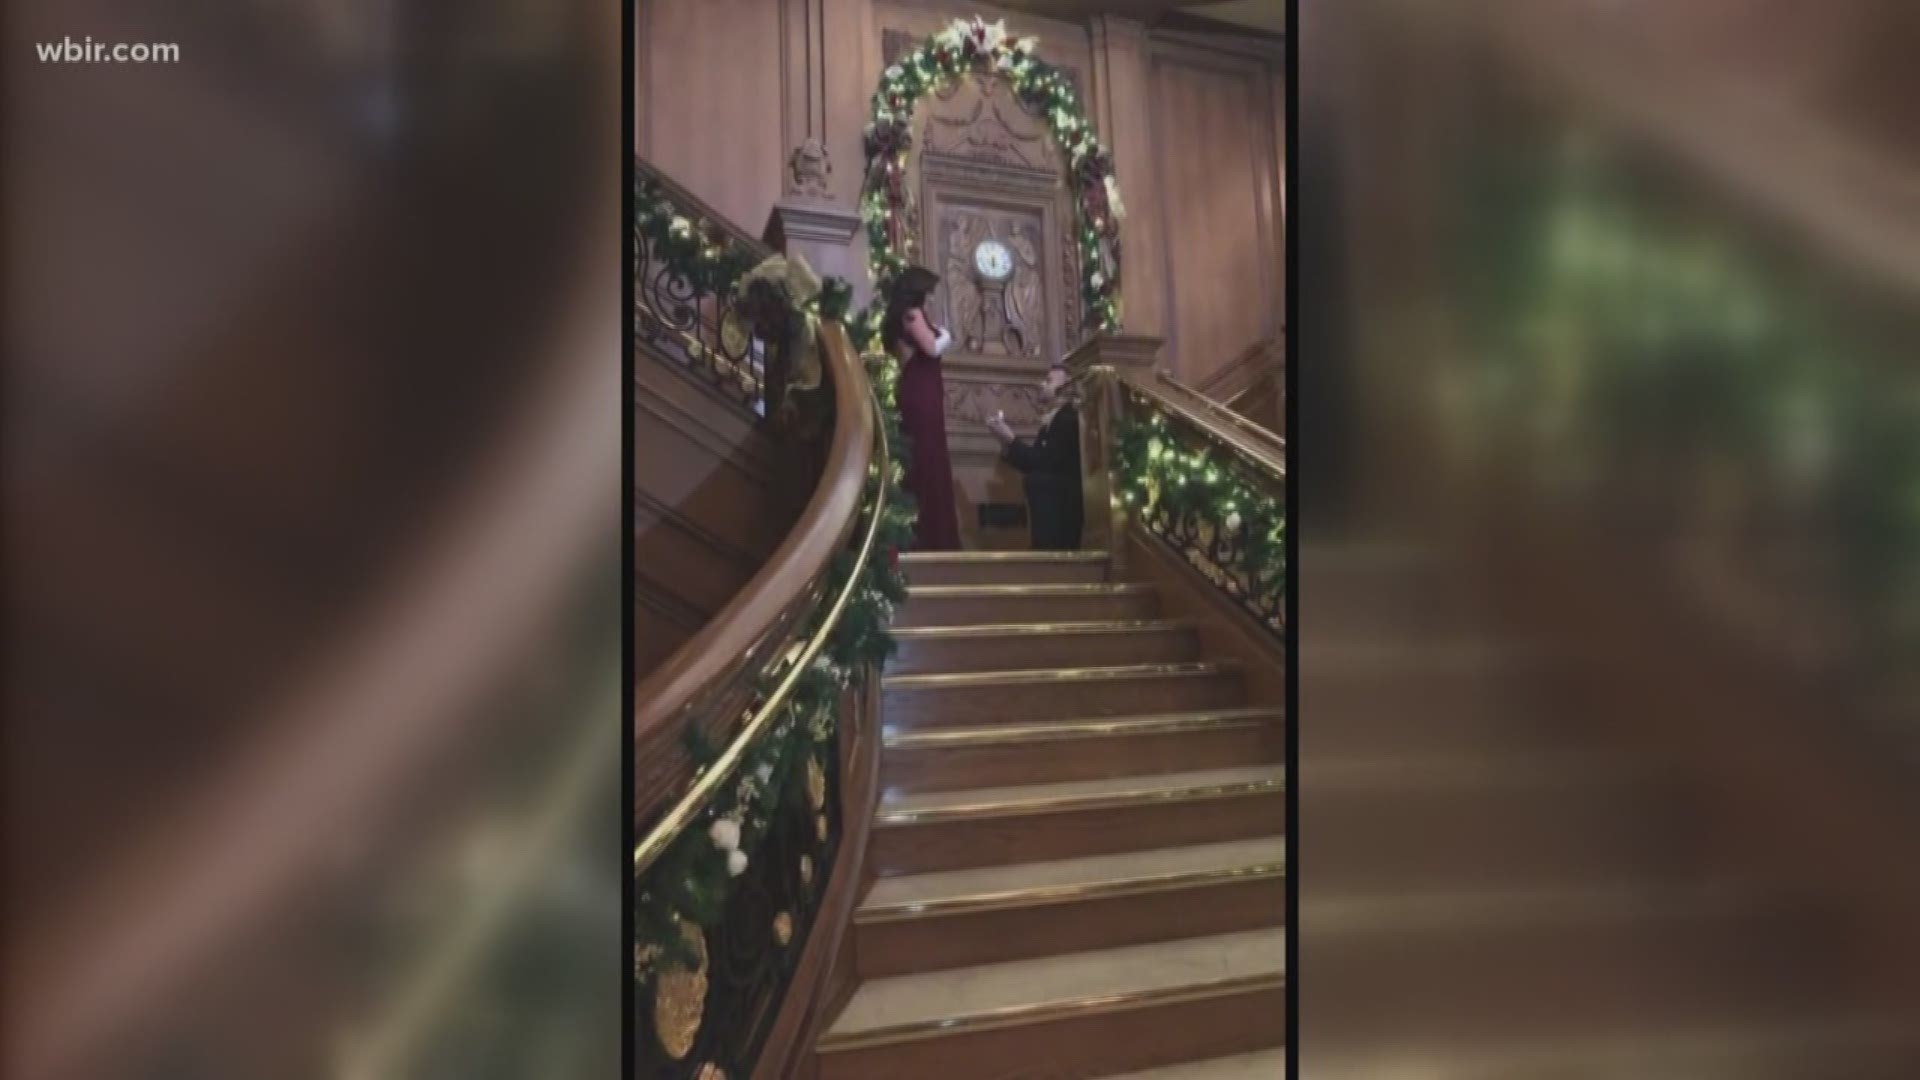 A Texas man went above and beyond to pop the question, recreating some movie magic at the Titanic Museum in Pigeon Forge.